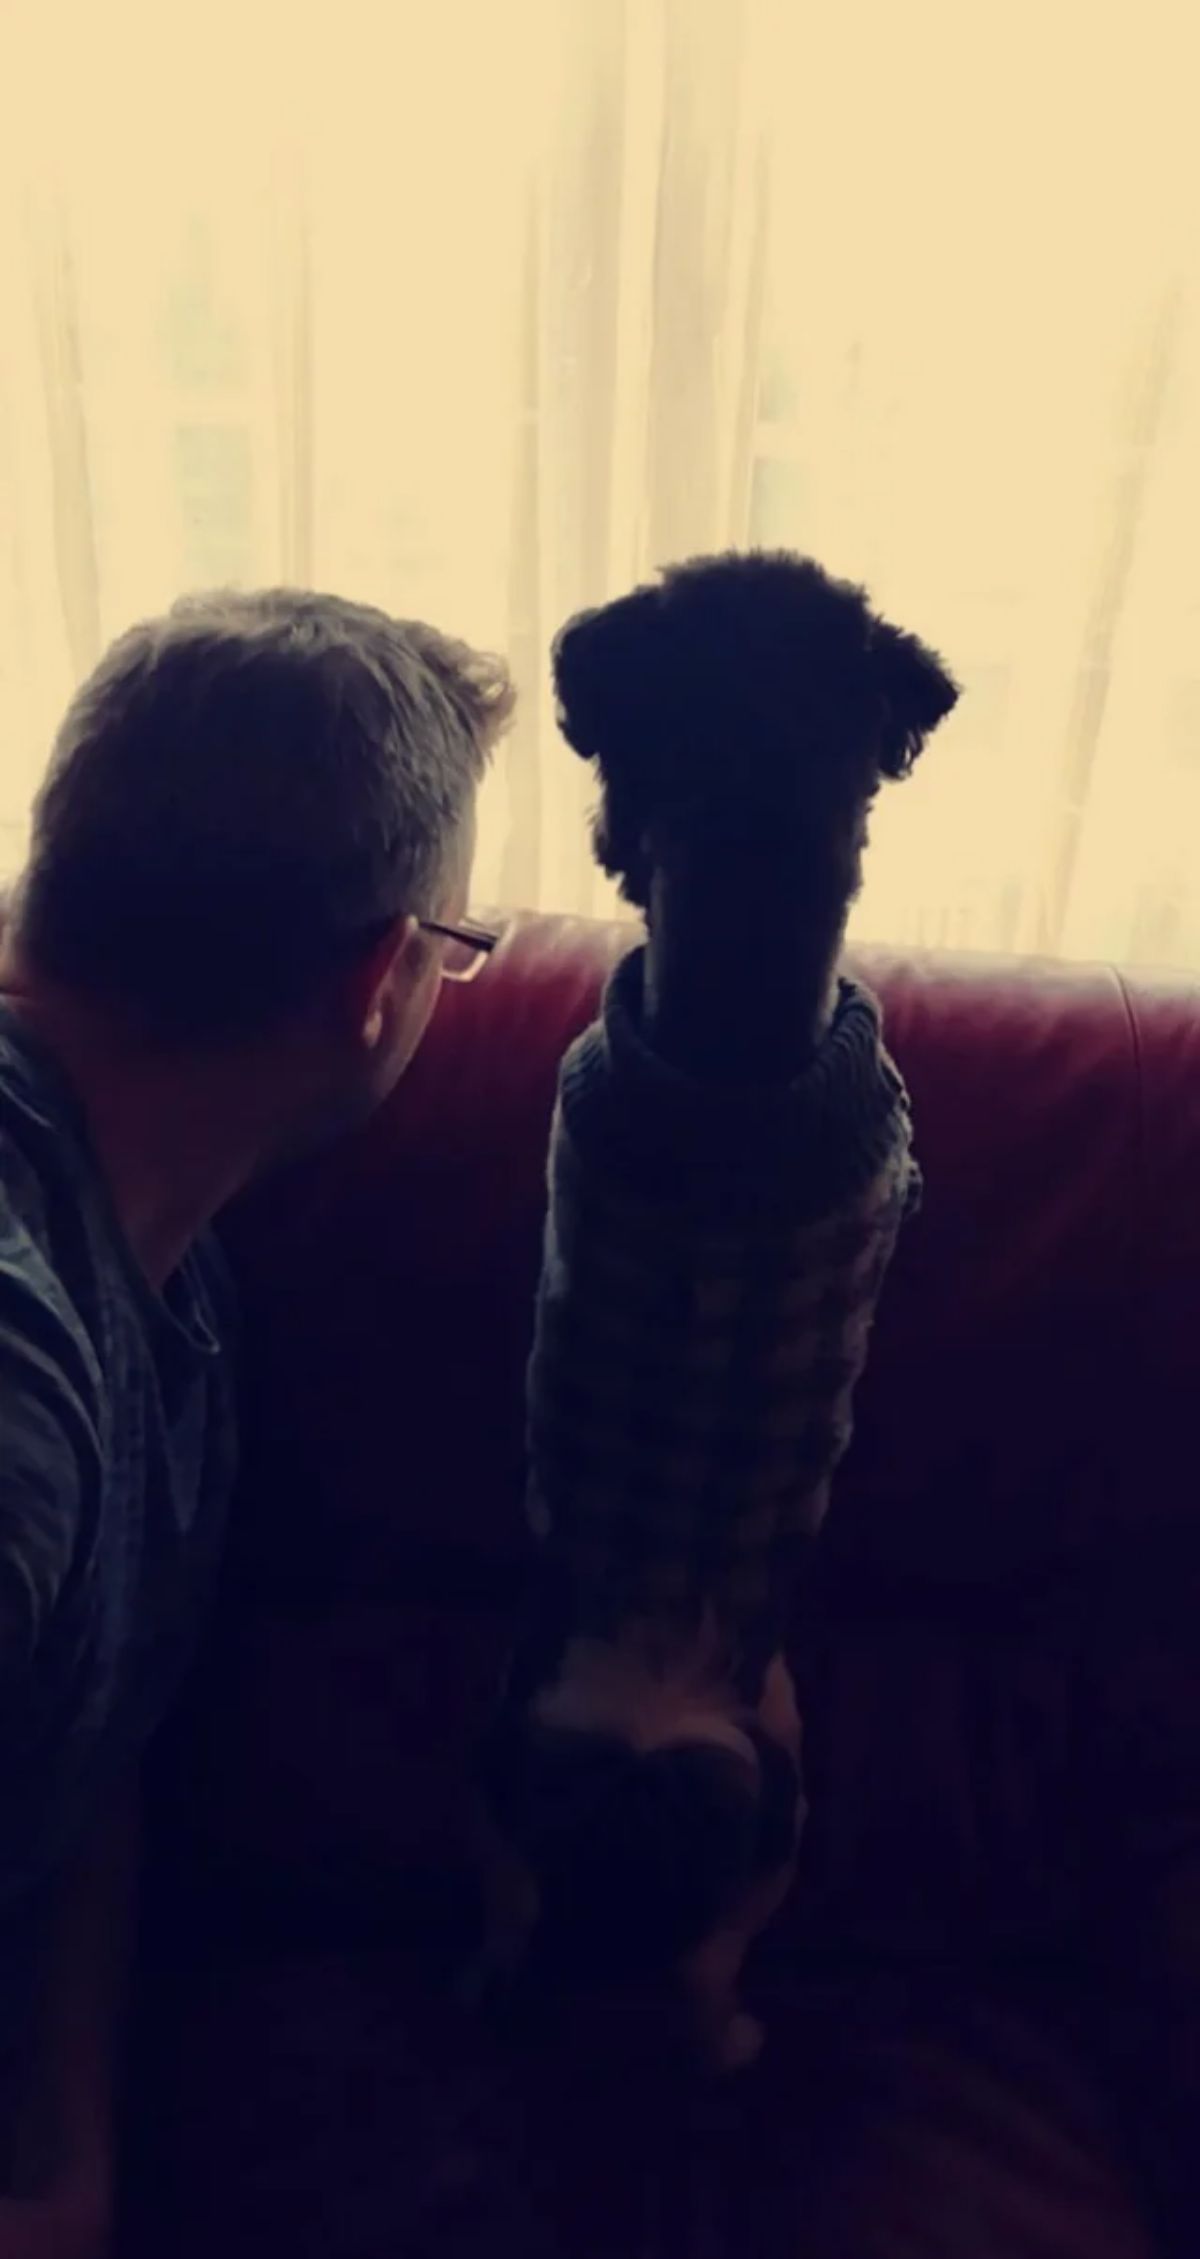 black bichon frise on a brown sofa next to a man with both looking out a window